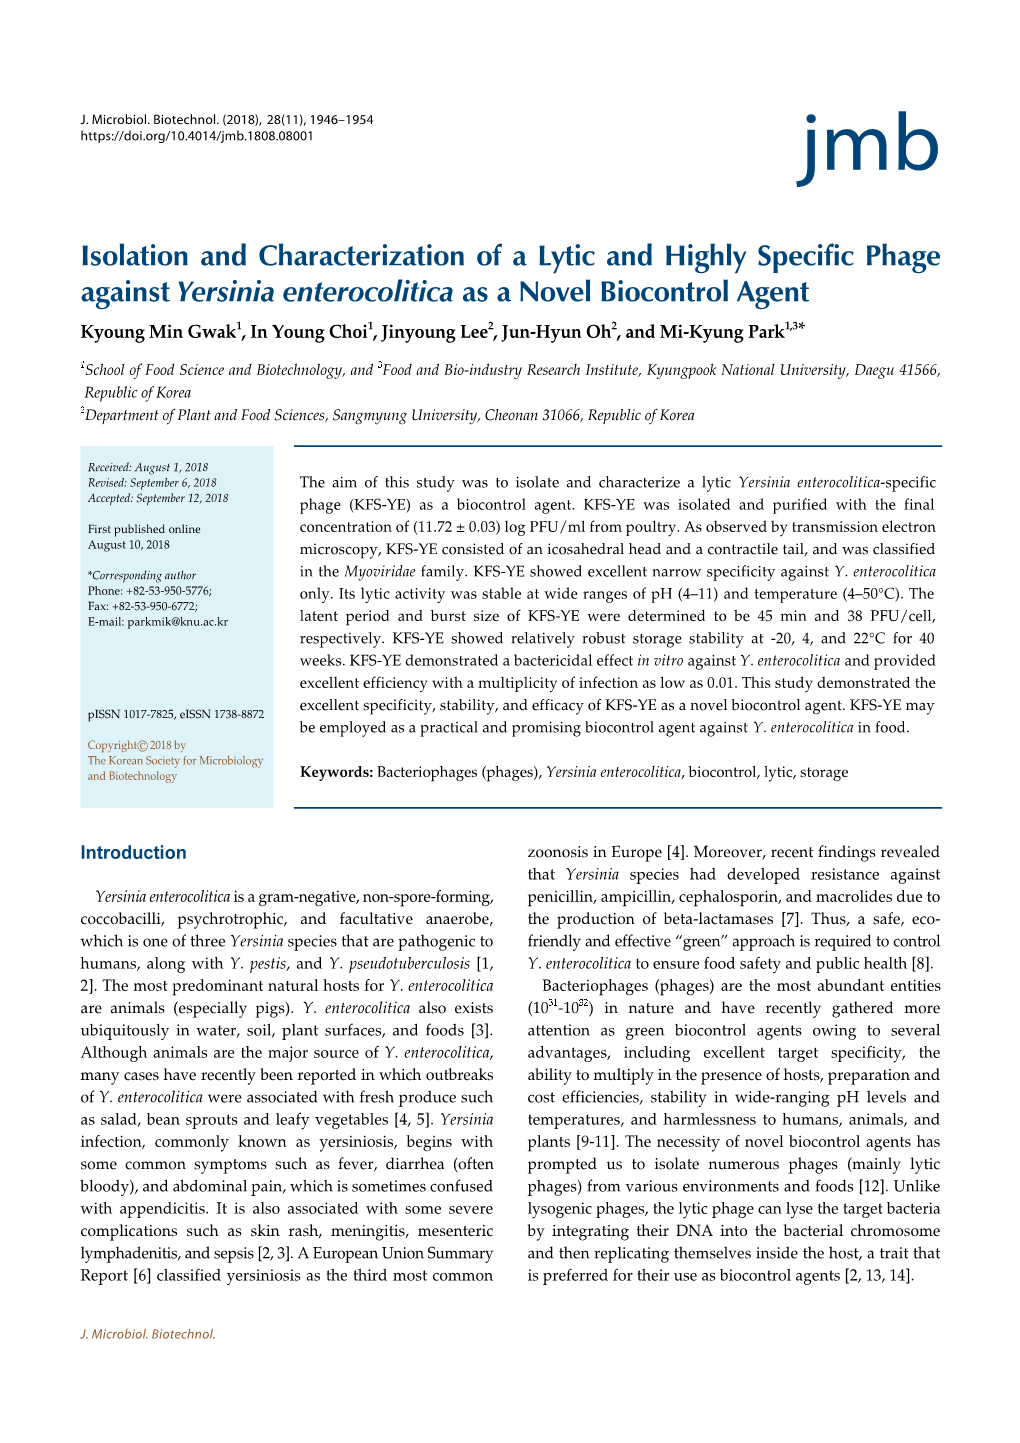 Isolation and Characterization of a Lytic and Highly Specific Phage